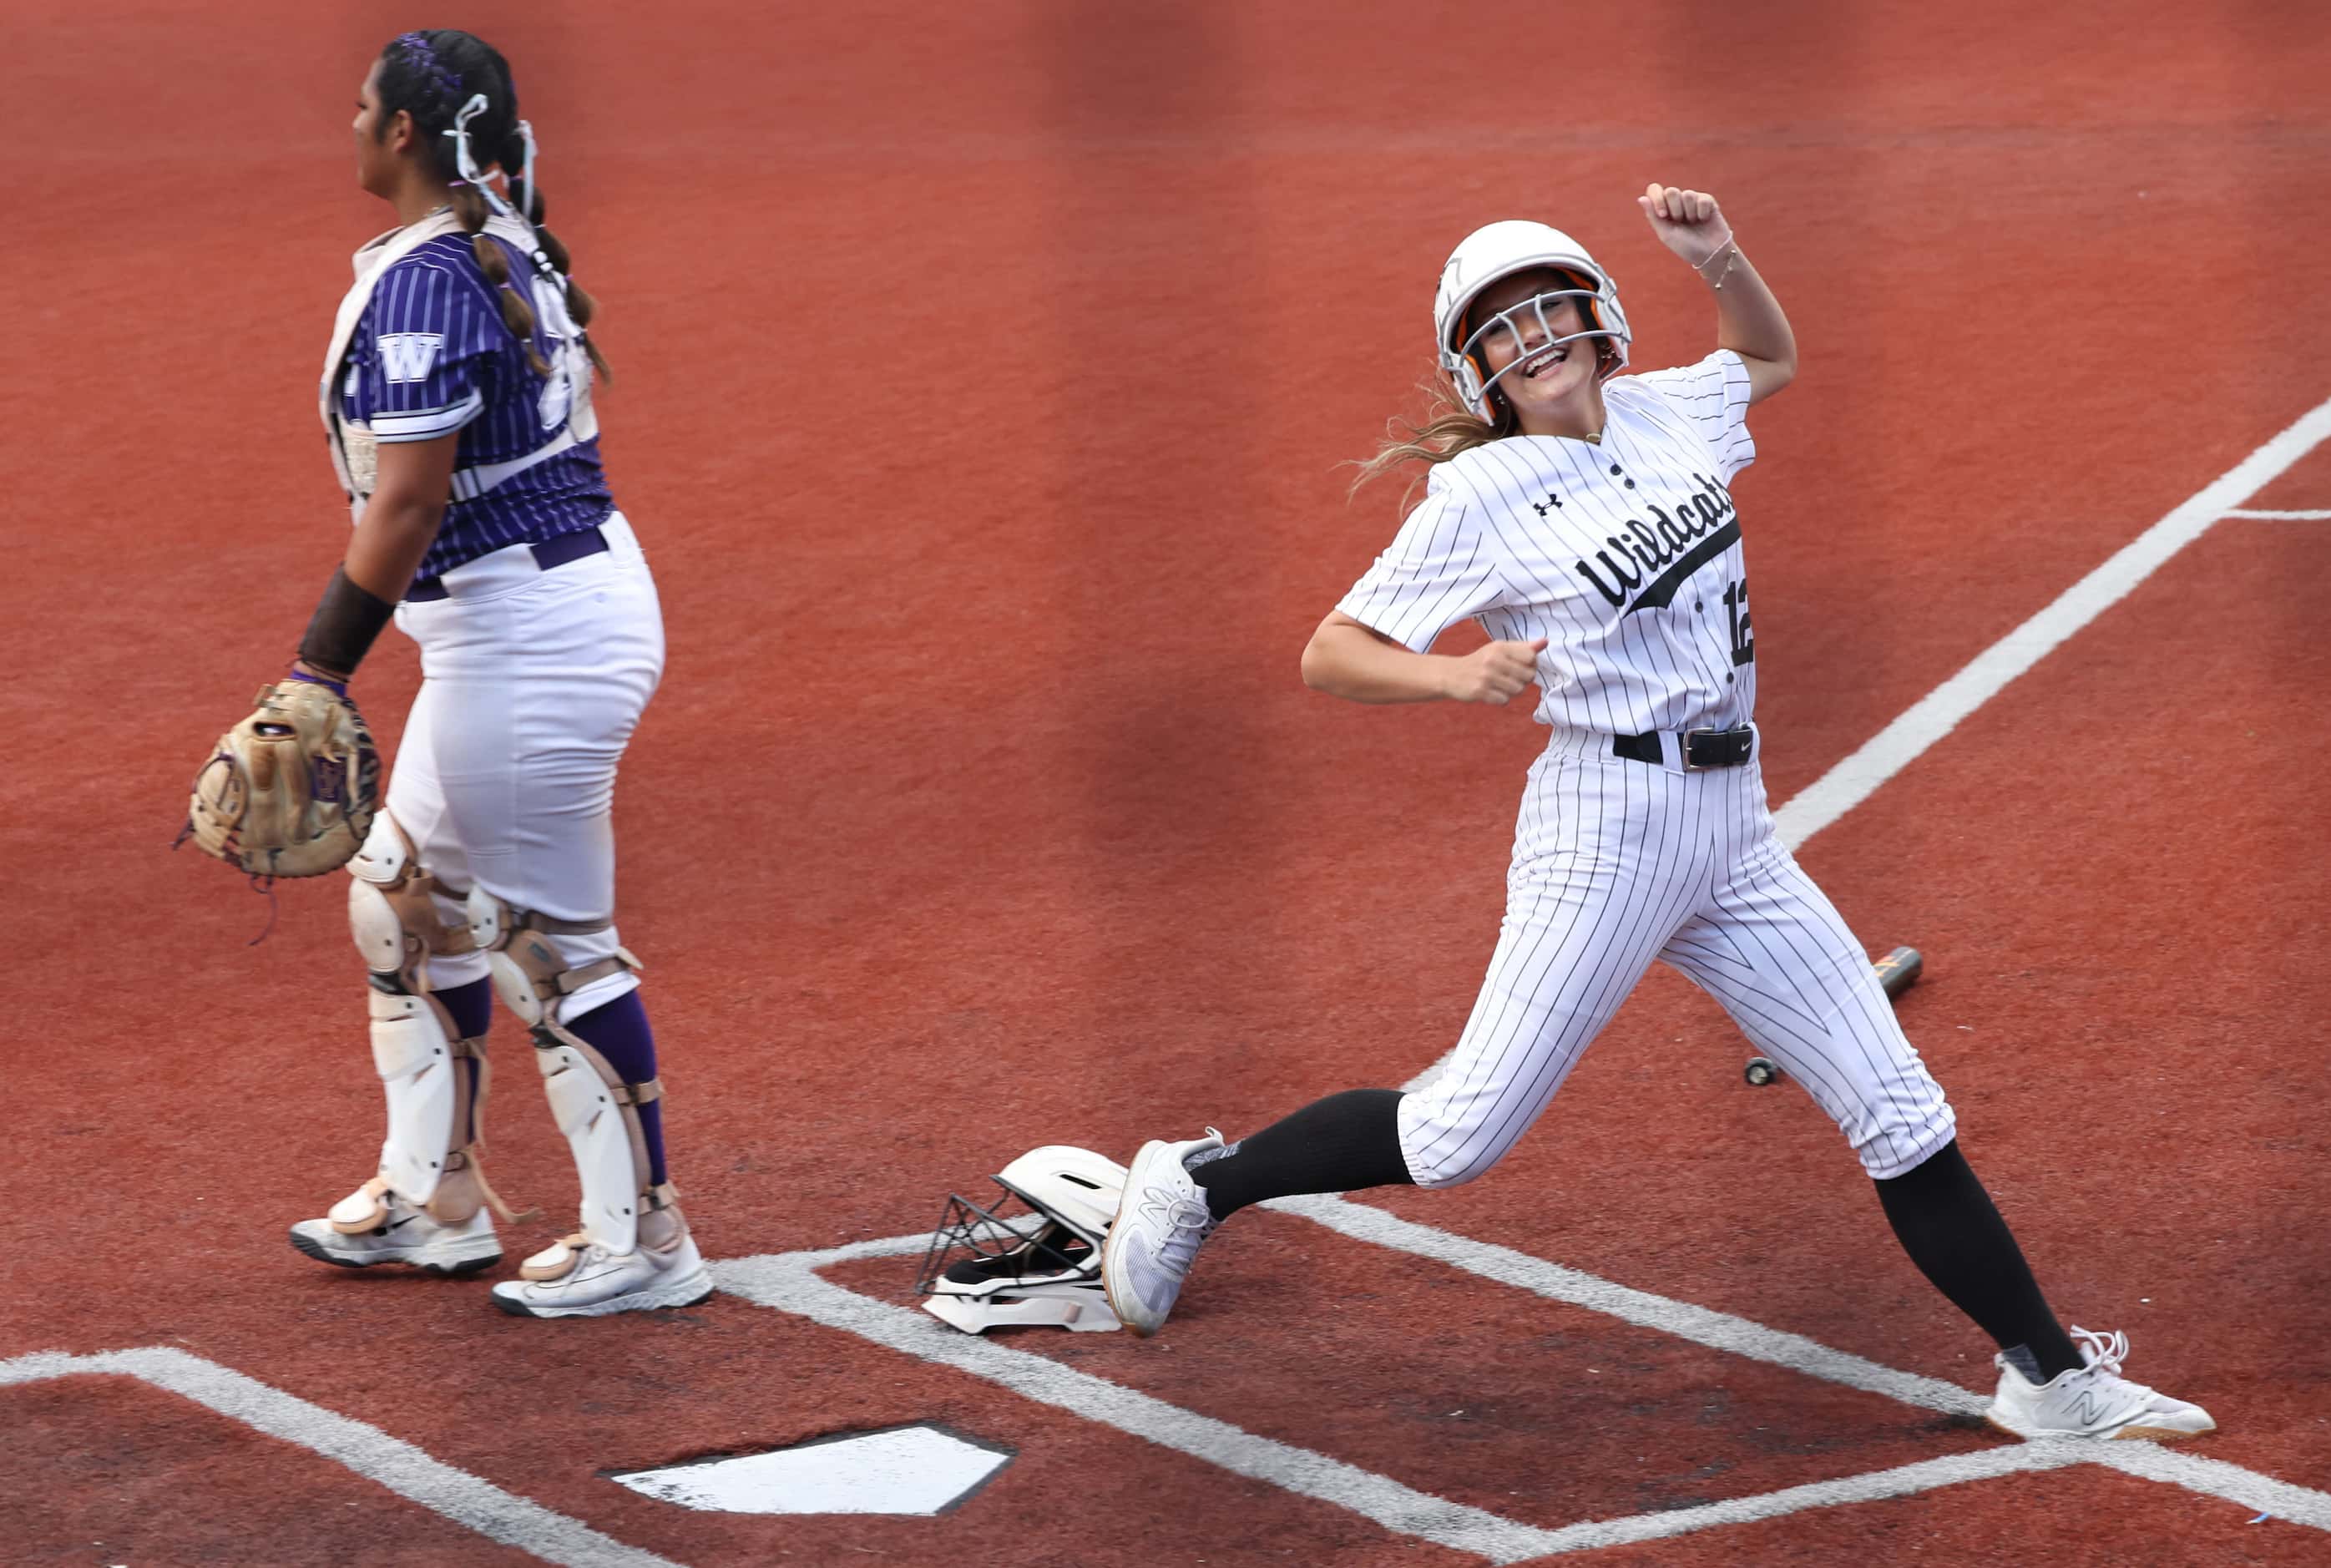 Denton Guyer outfielder Emma Richard (12) was all smiles as she scored as part of a 3-run...